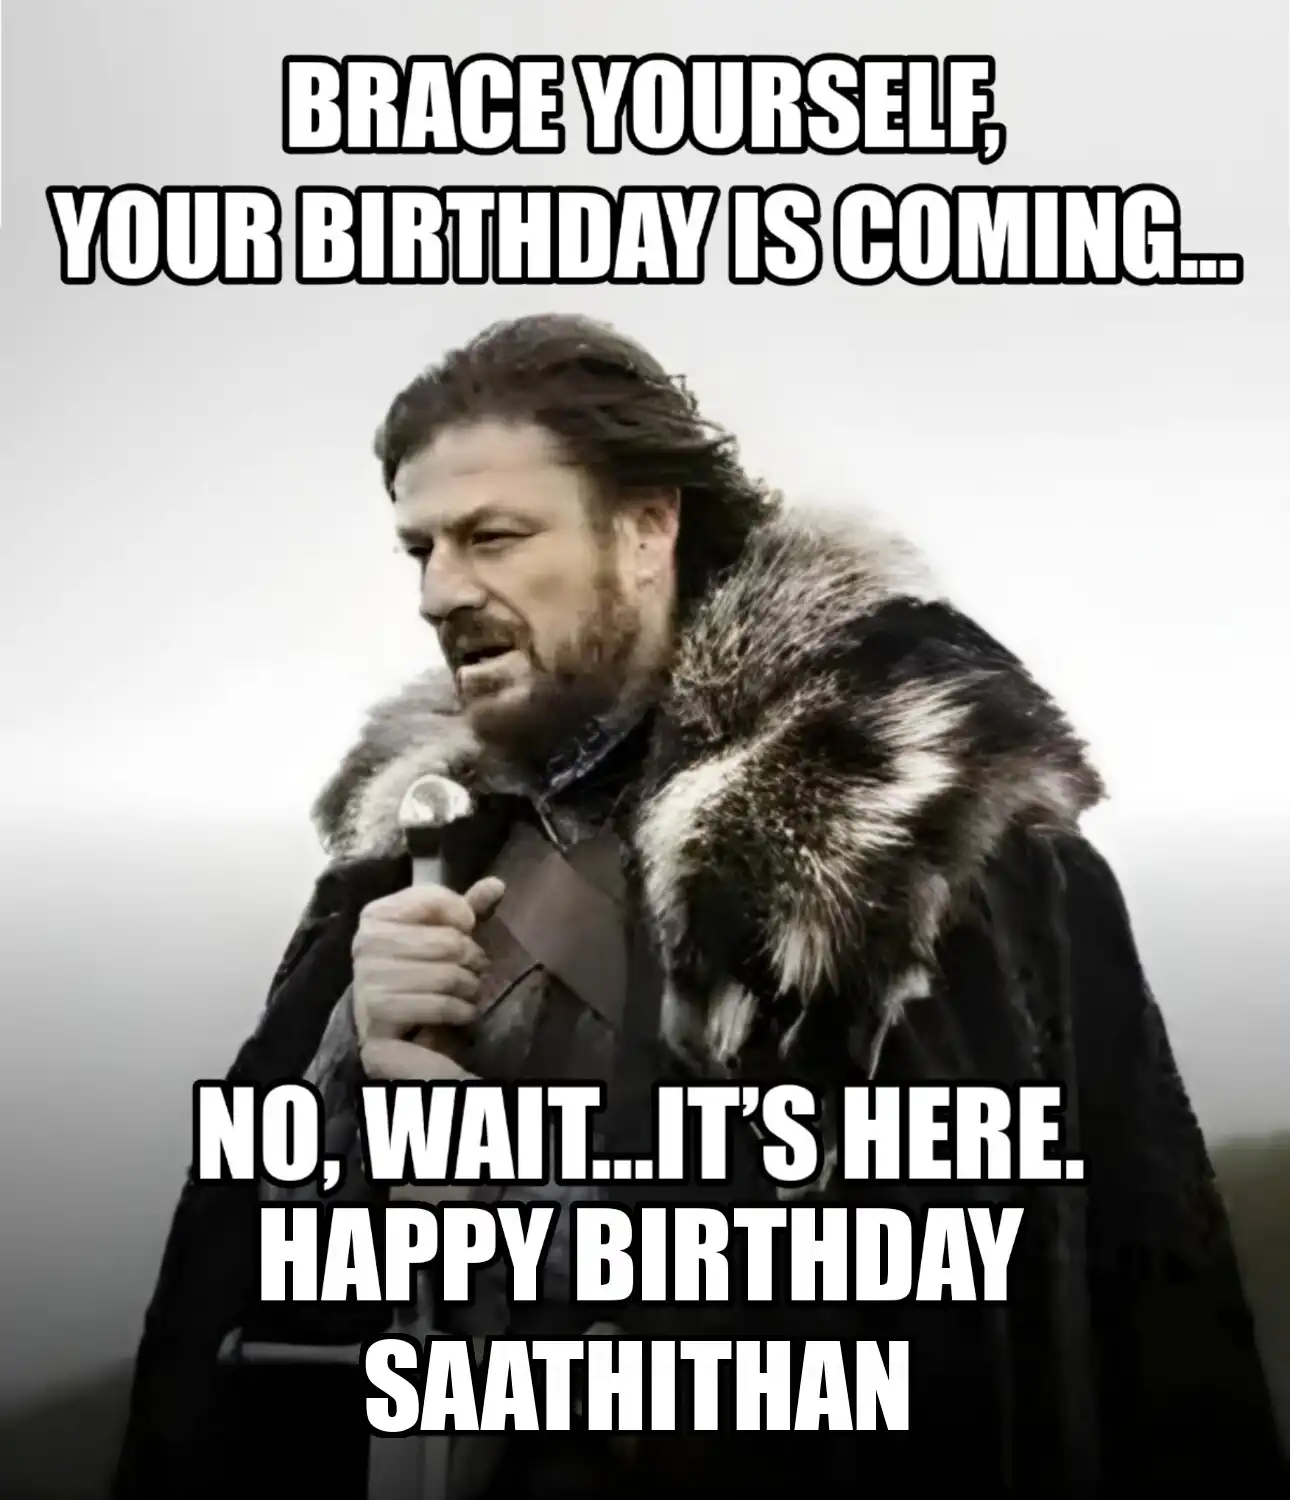 Happy Birthday Saathithan Brace Yourself Your Birthday Is Coming Meme